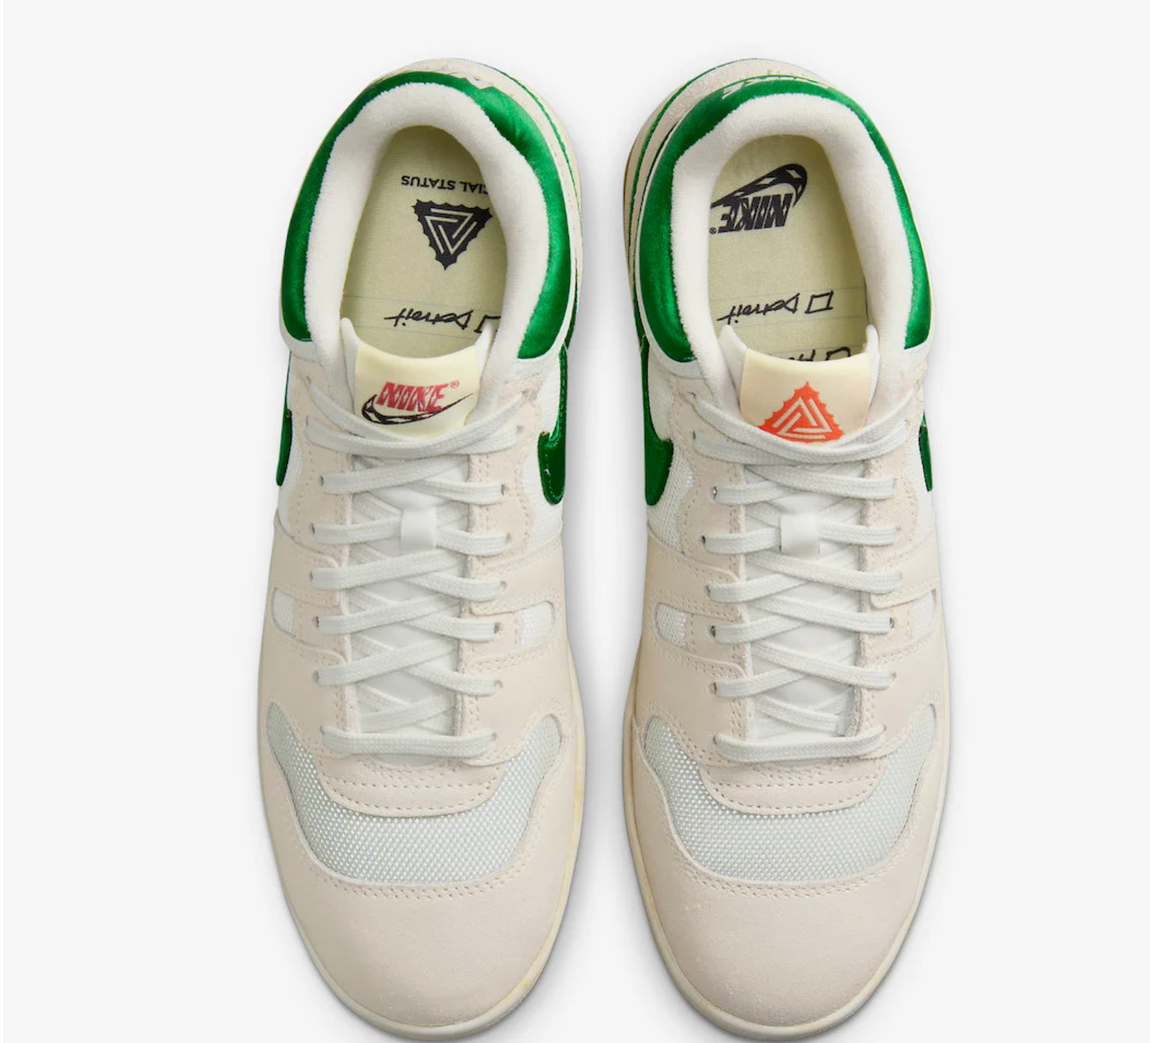 Nike Attack QS ( Ivory / Pine Green / Campfire Orange ) - Nike Attack QS ( Ivory / Pine Green / Campfire Orange ) - 